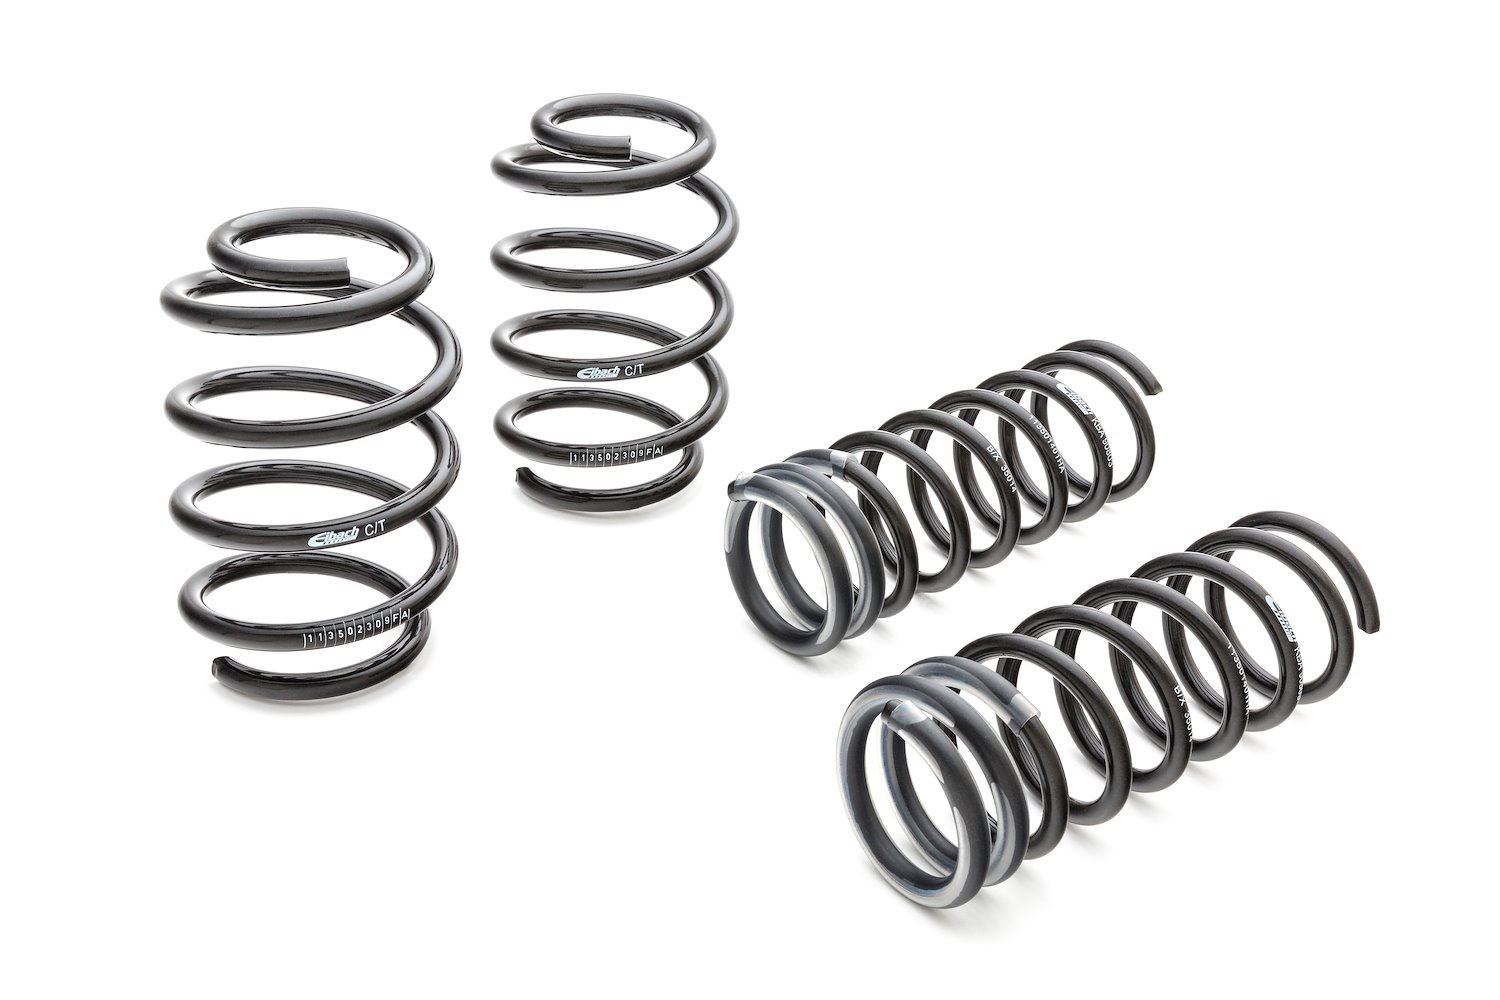 15118.140 Pro-Kit Lowering Springs 2012-2016 Audi A6 Quattro - 1.200 in. Front/1 in. Rear Drop